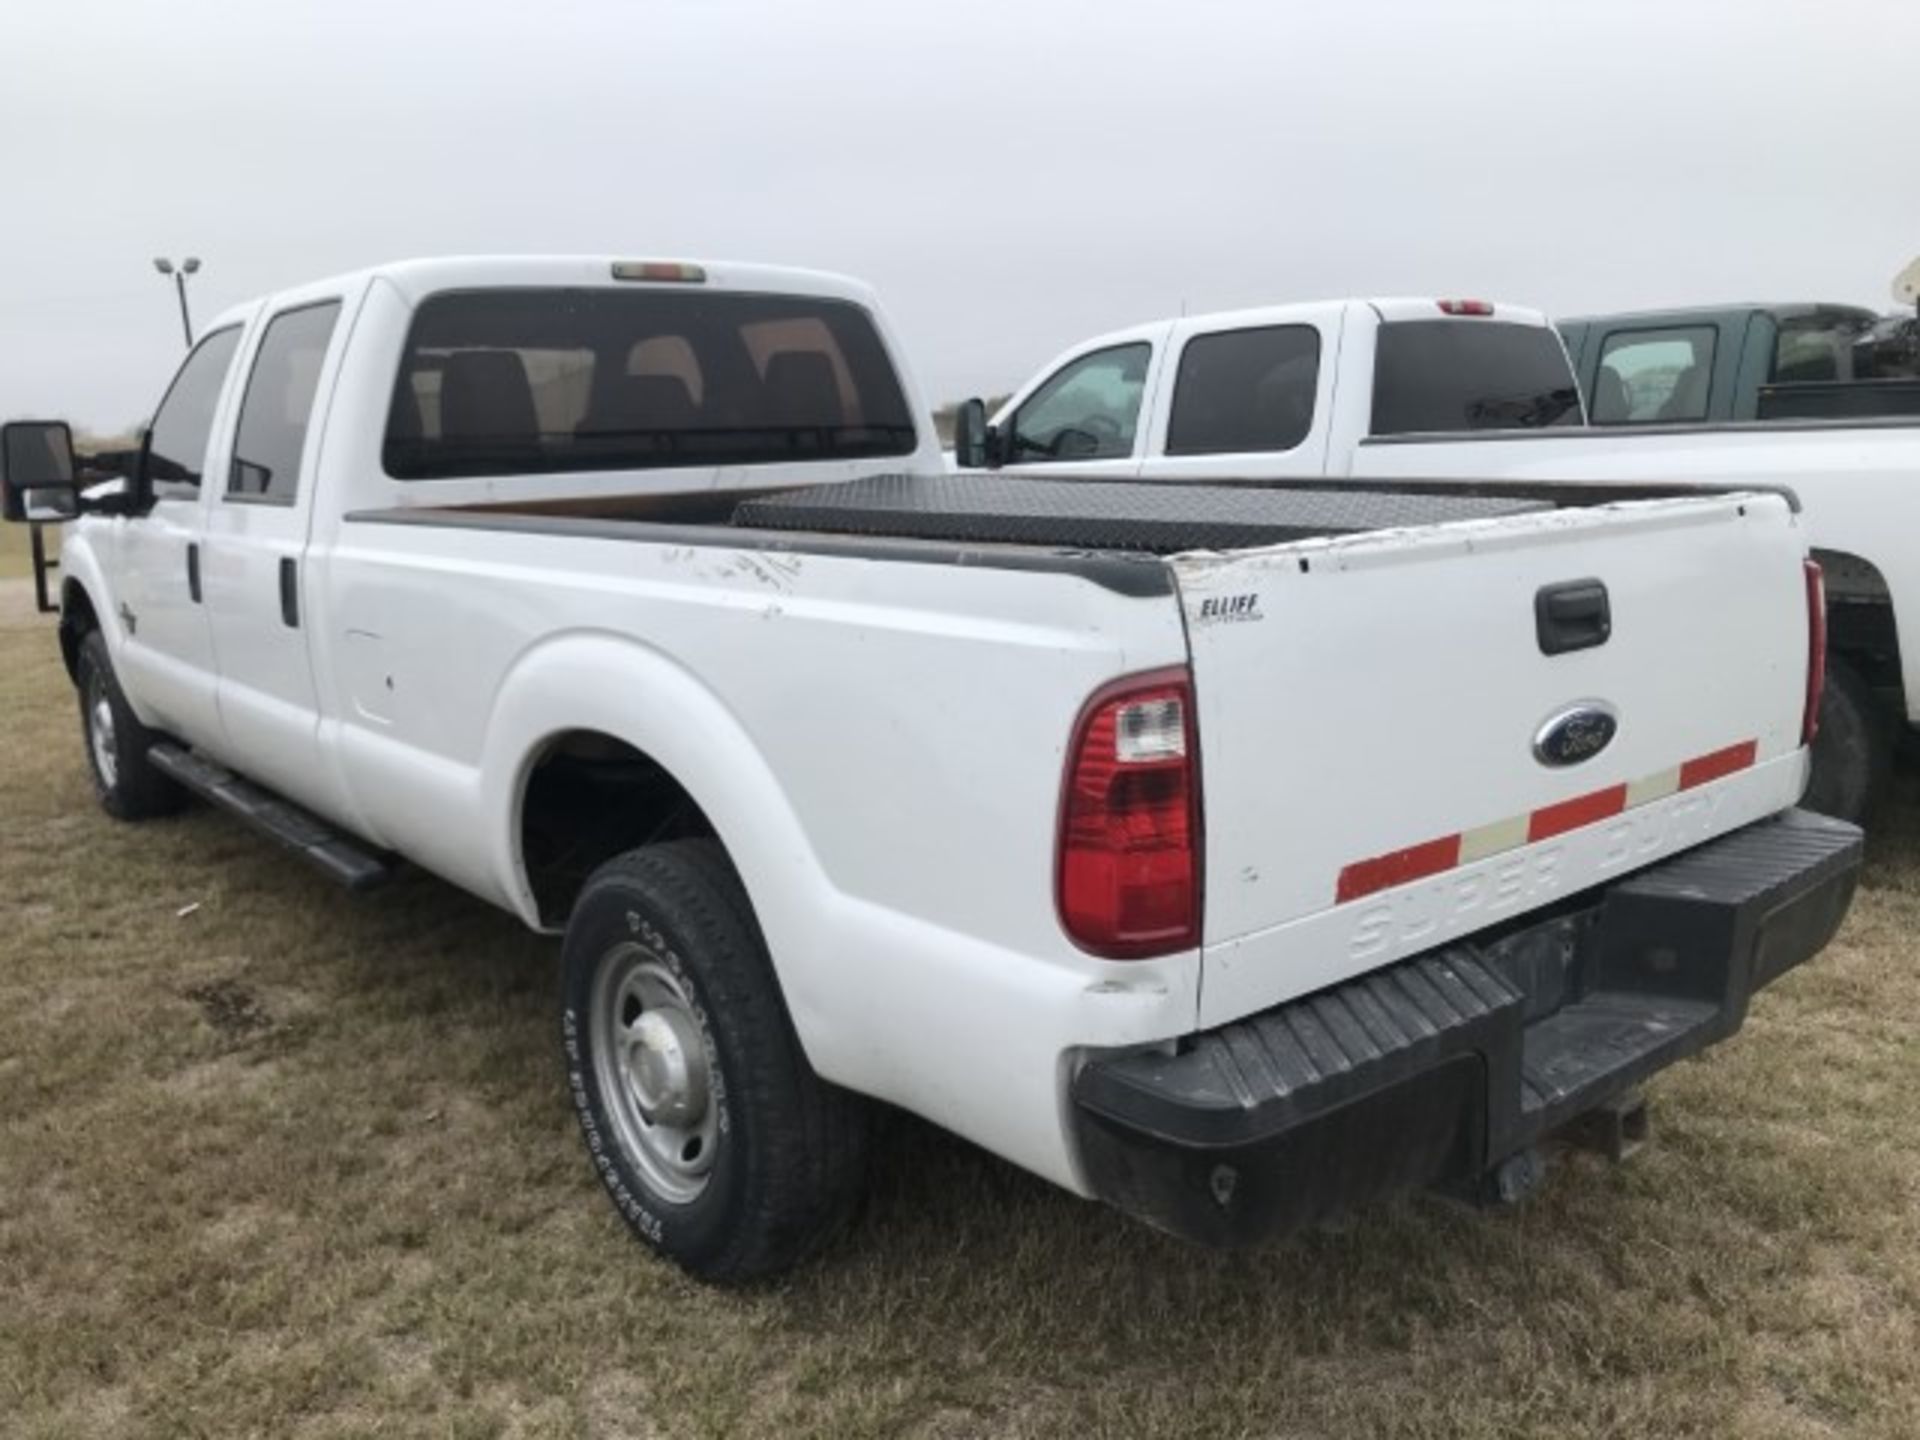 2011 Ford F-250 VIN: 1FT7W2BT9BEC06388 Odometer States: 209,070 Color: Whit - Image 4 of 6